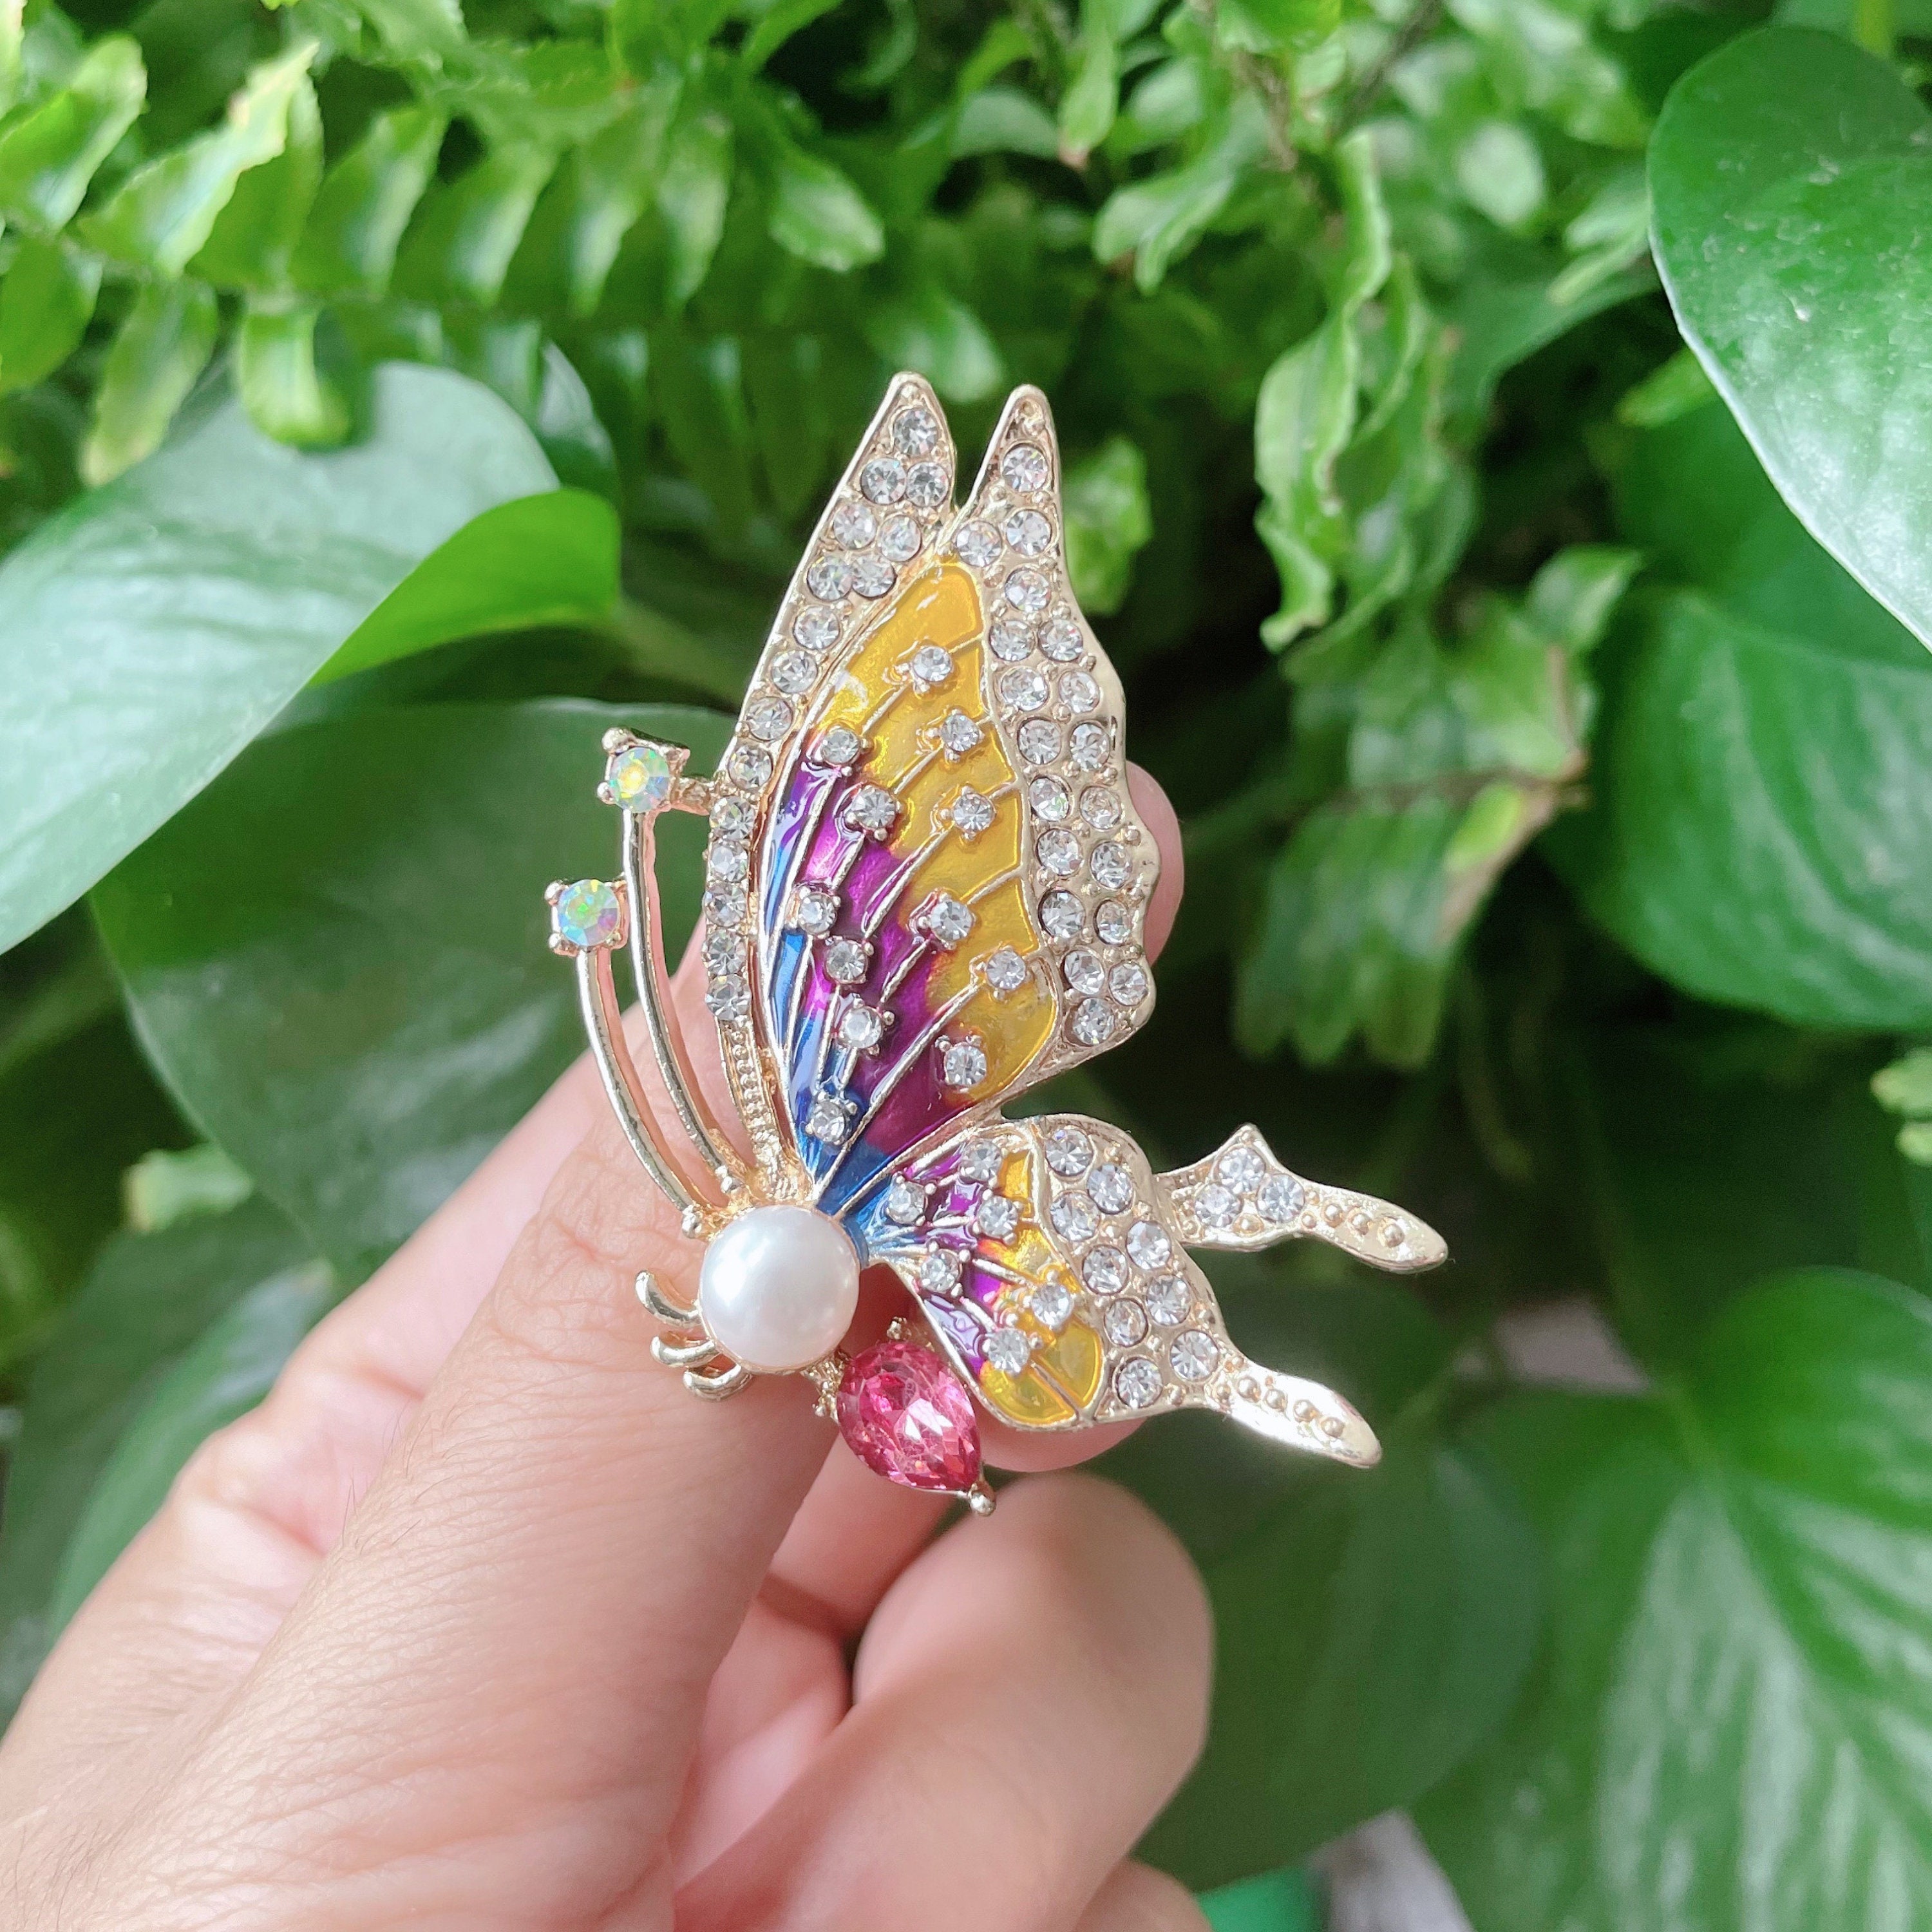 Brooch Pins, Brooch Crafts,Delicate Small Brooch Pin Gift Faux Pearls  Rhinestones Butterflies Brooch Costume Accessories